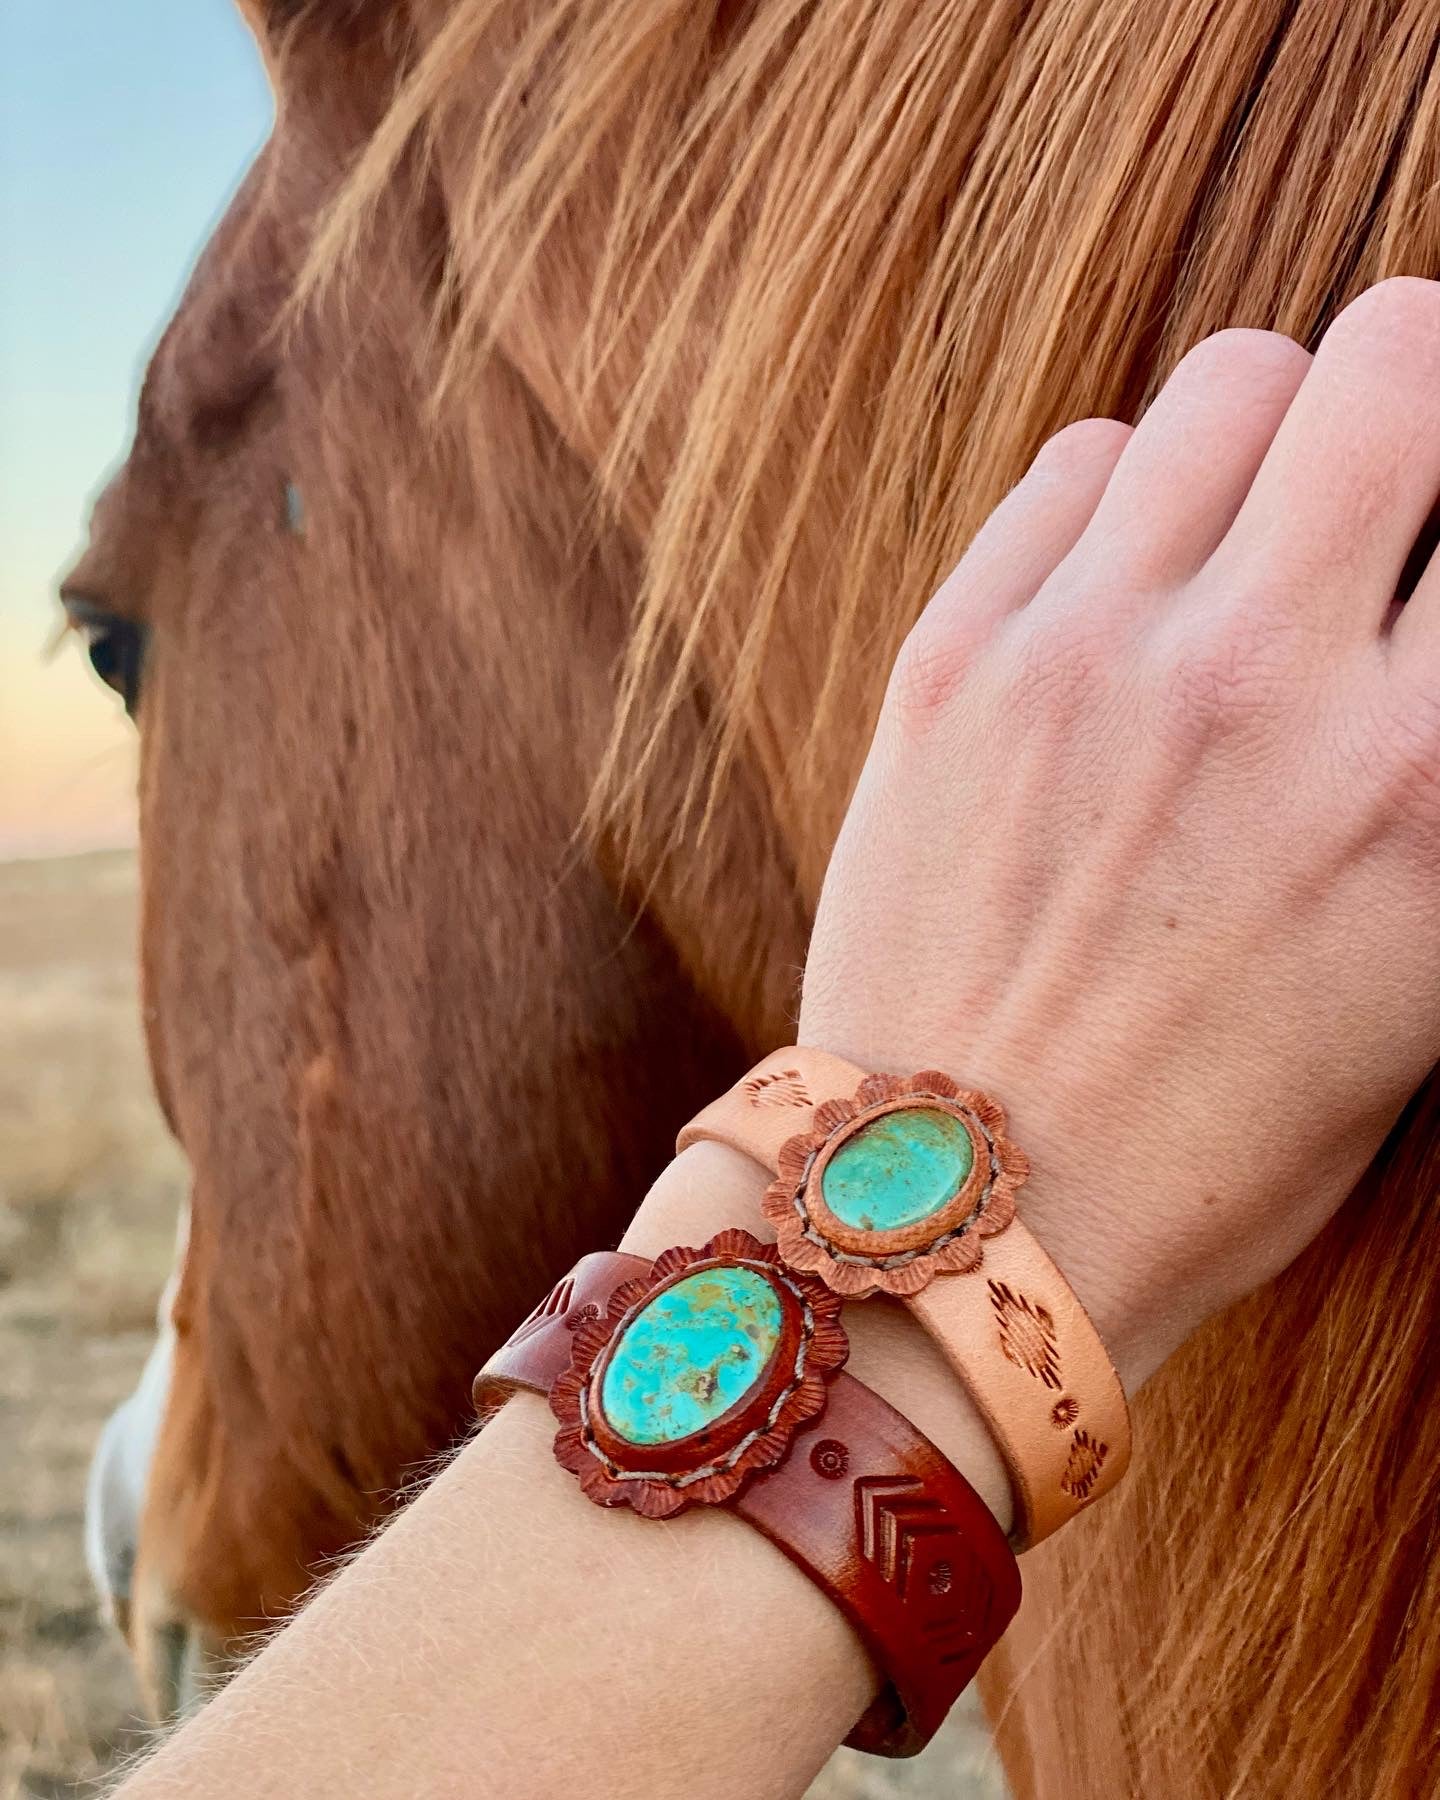 Small turquoise and leather cuffs- Tyrone turquoise